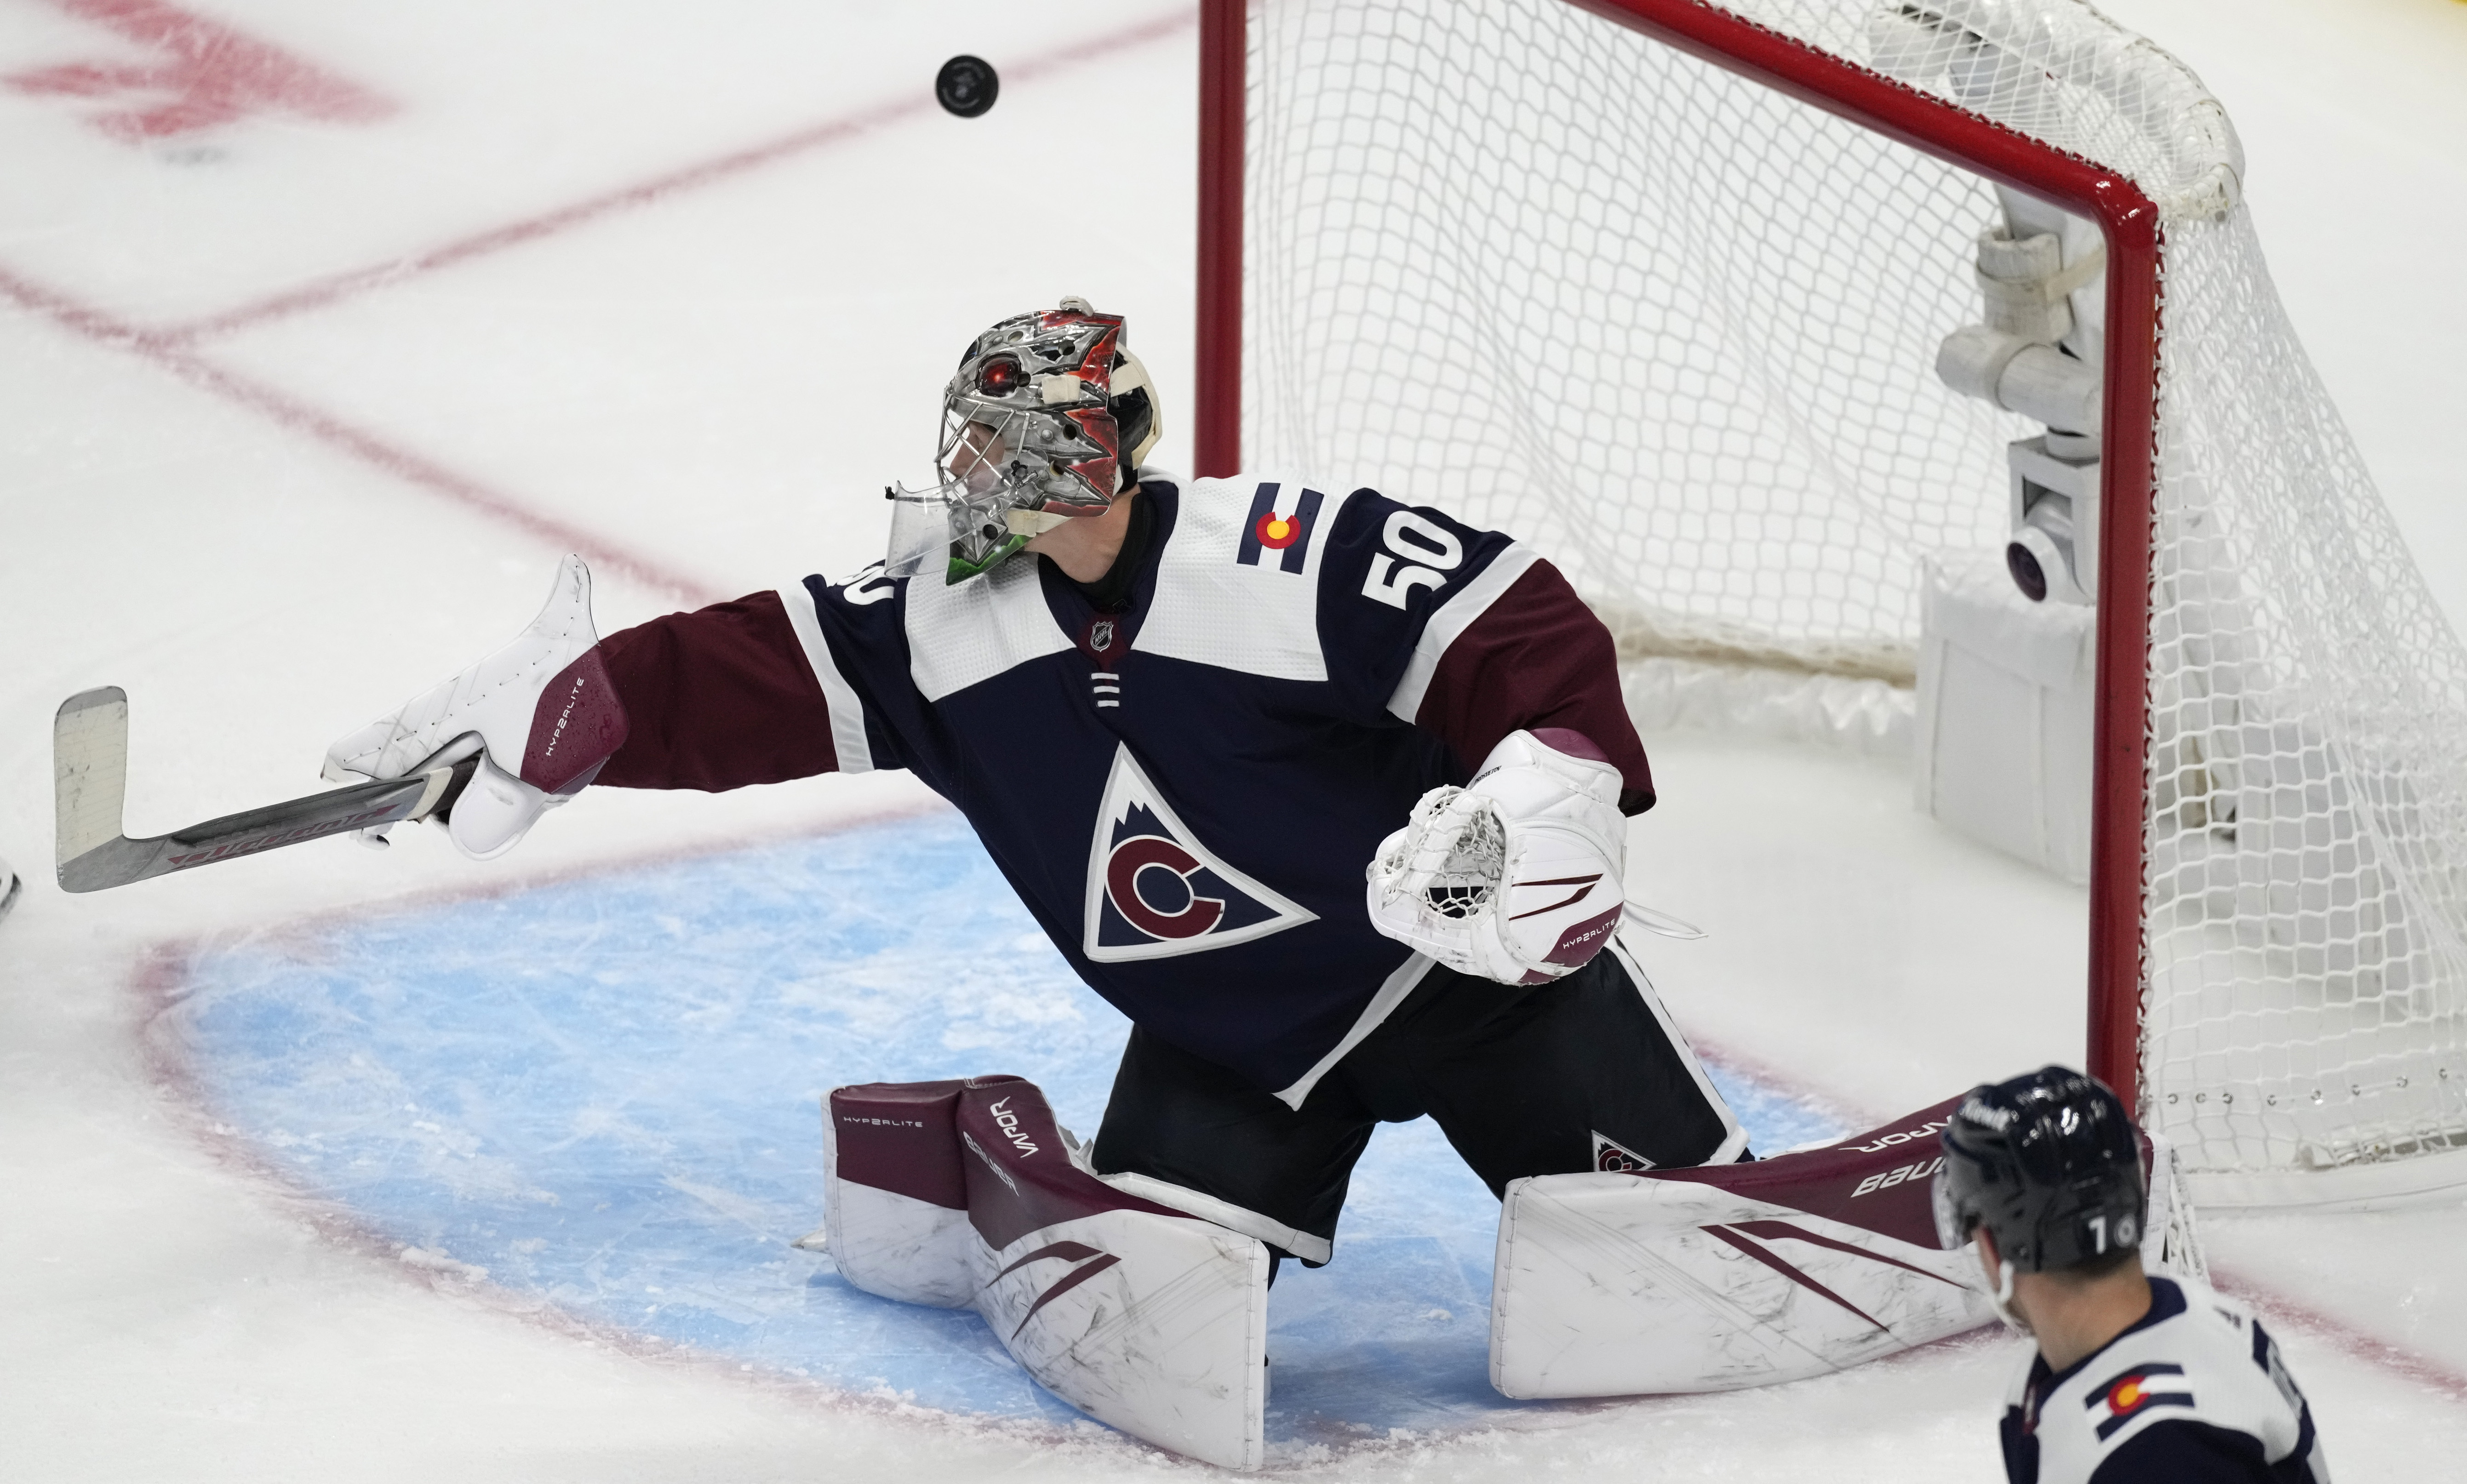 PHOTOS: Colorado Avalanche beat the St. Louis Blues in Game 3